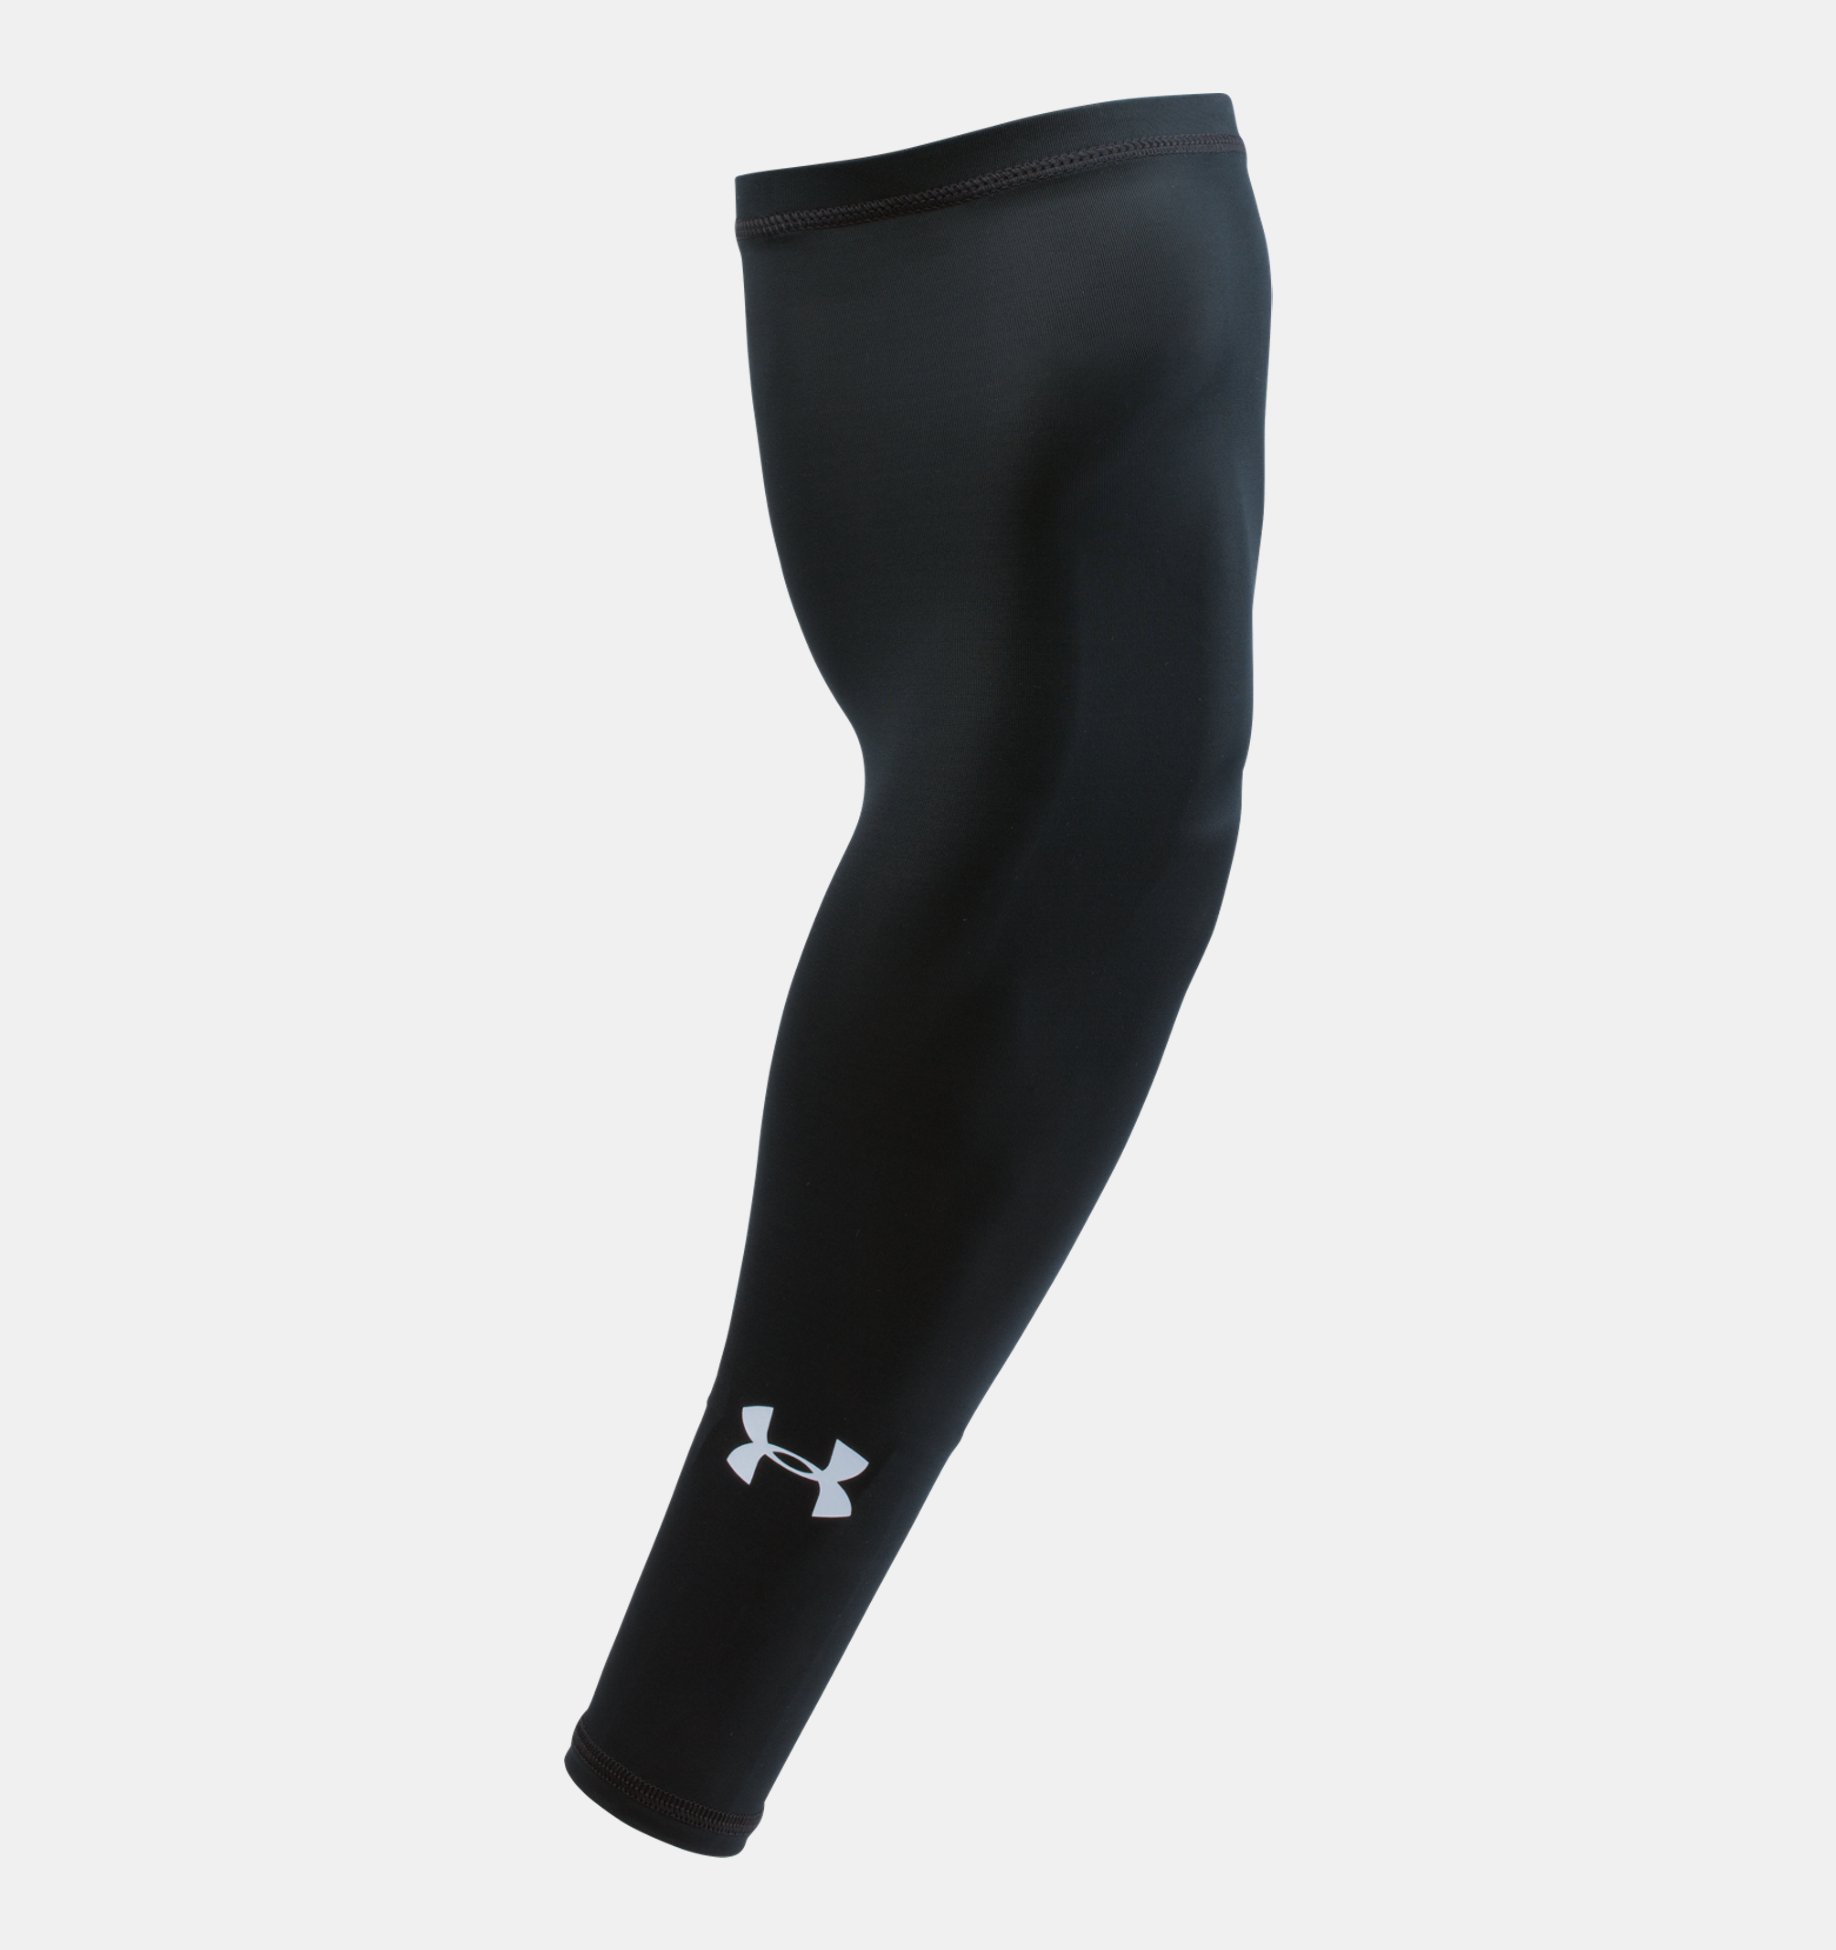 L/XL Sports Youth Adult S/M Under Armour UA Shooter Compression Arm Sleeve 